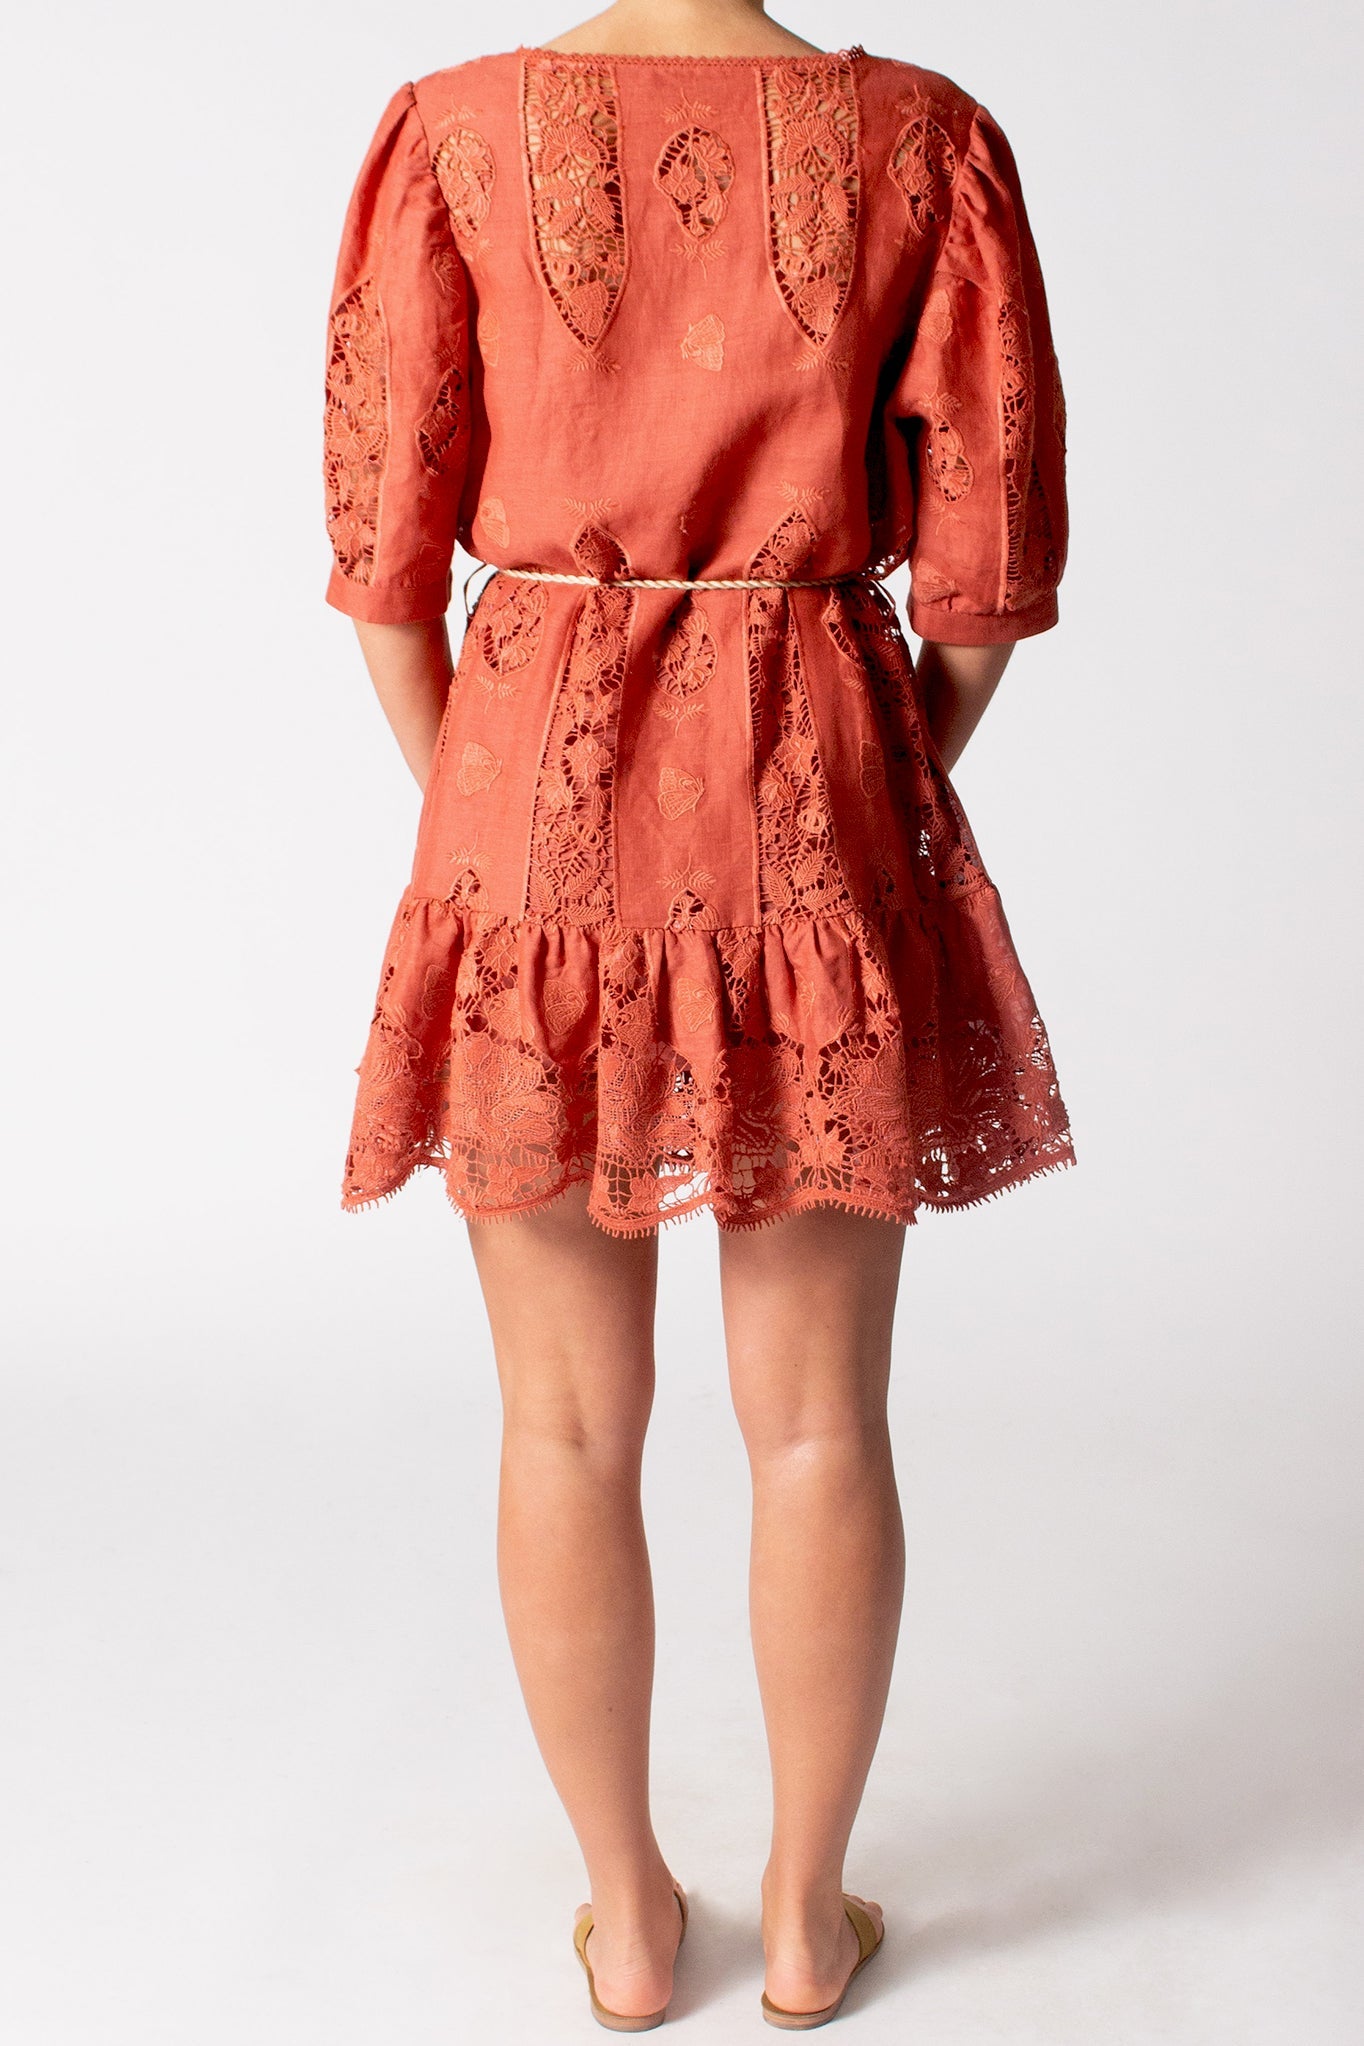 Dixie Lotus Embroidery Dress - Rust by Miguelina